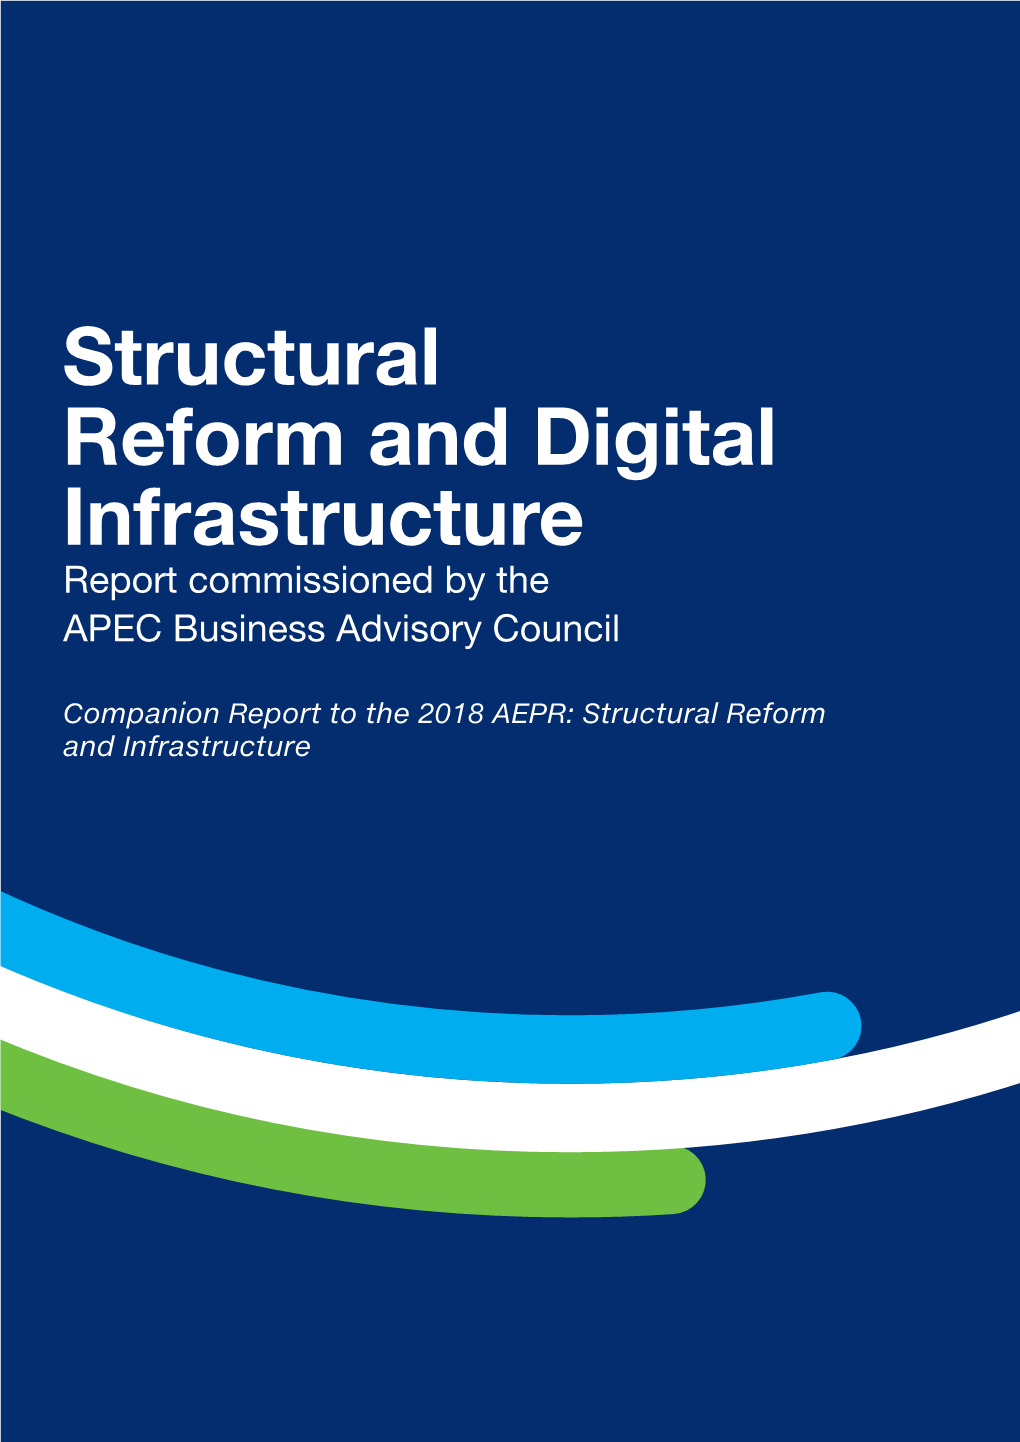 Structural Reform and Digital Infrastructure Report Commissioned by the APEC Business Advisory Council